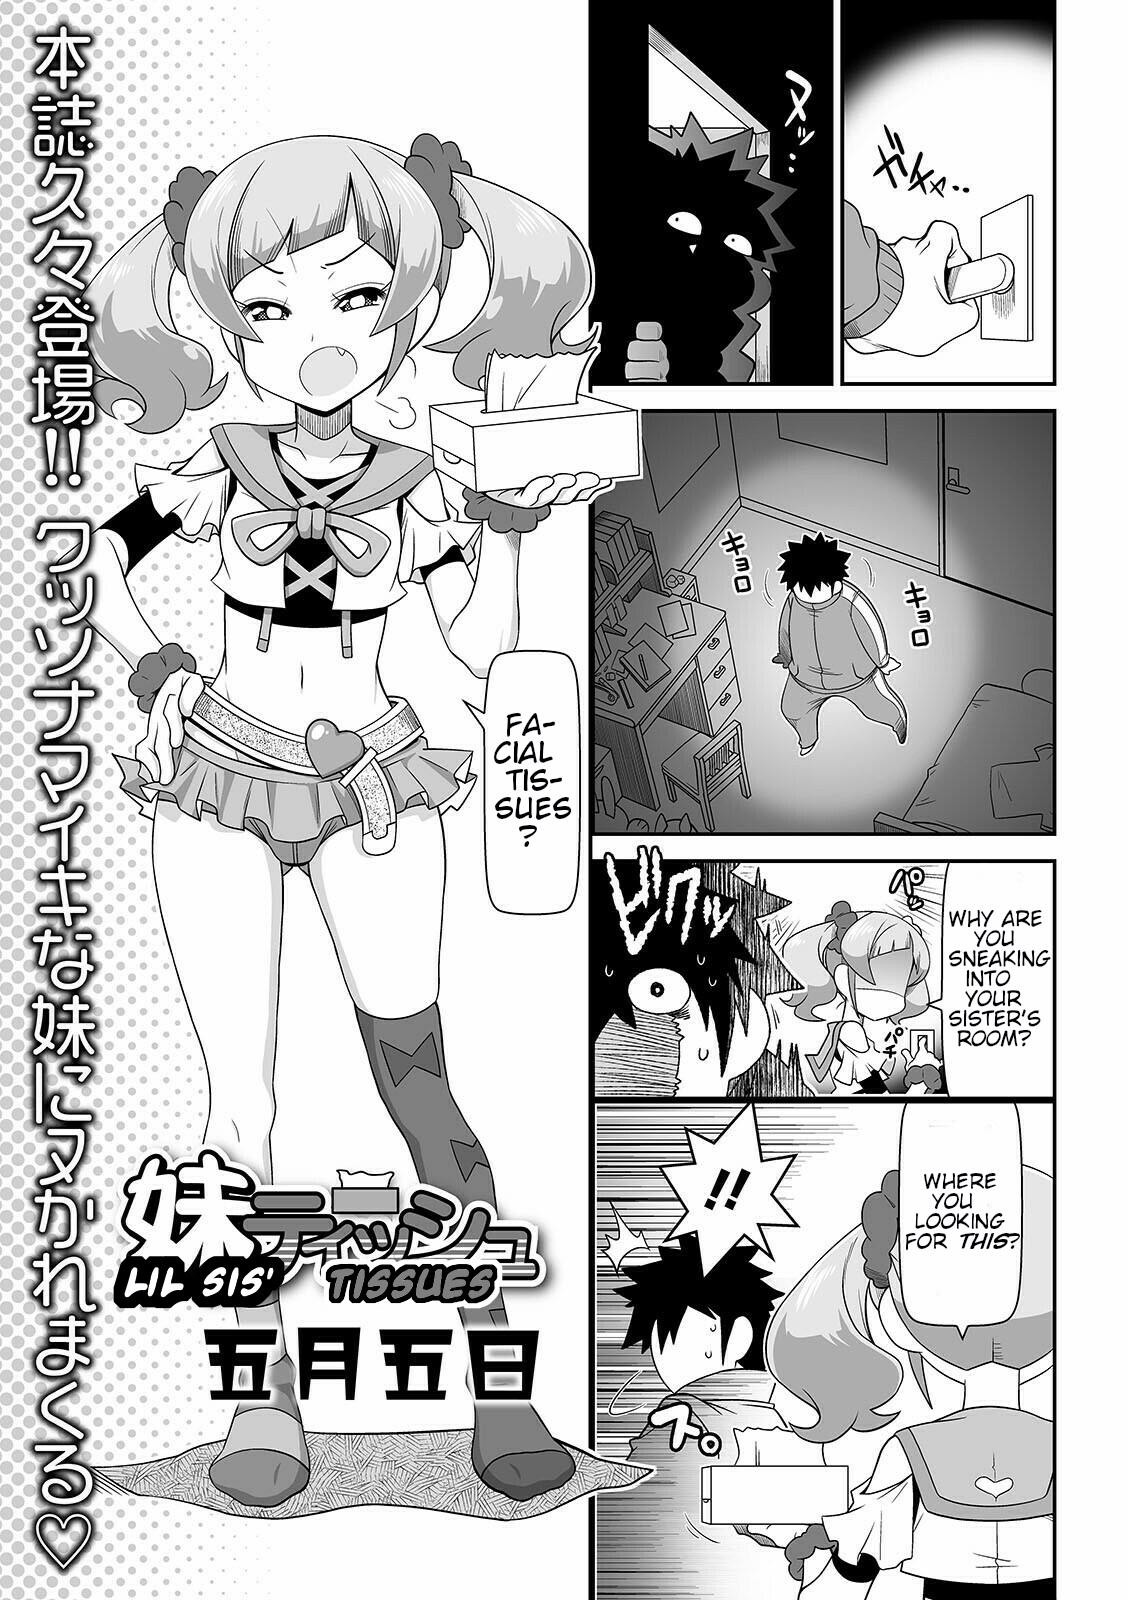 Holes Imouto Tissue | Lil Sis' Tissues - Original Calle - Page 1